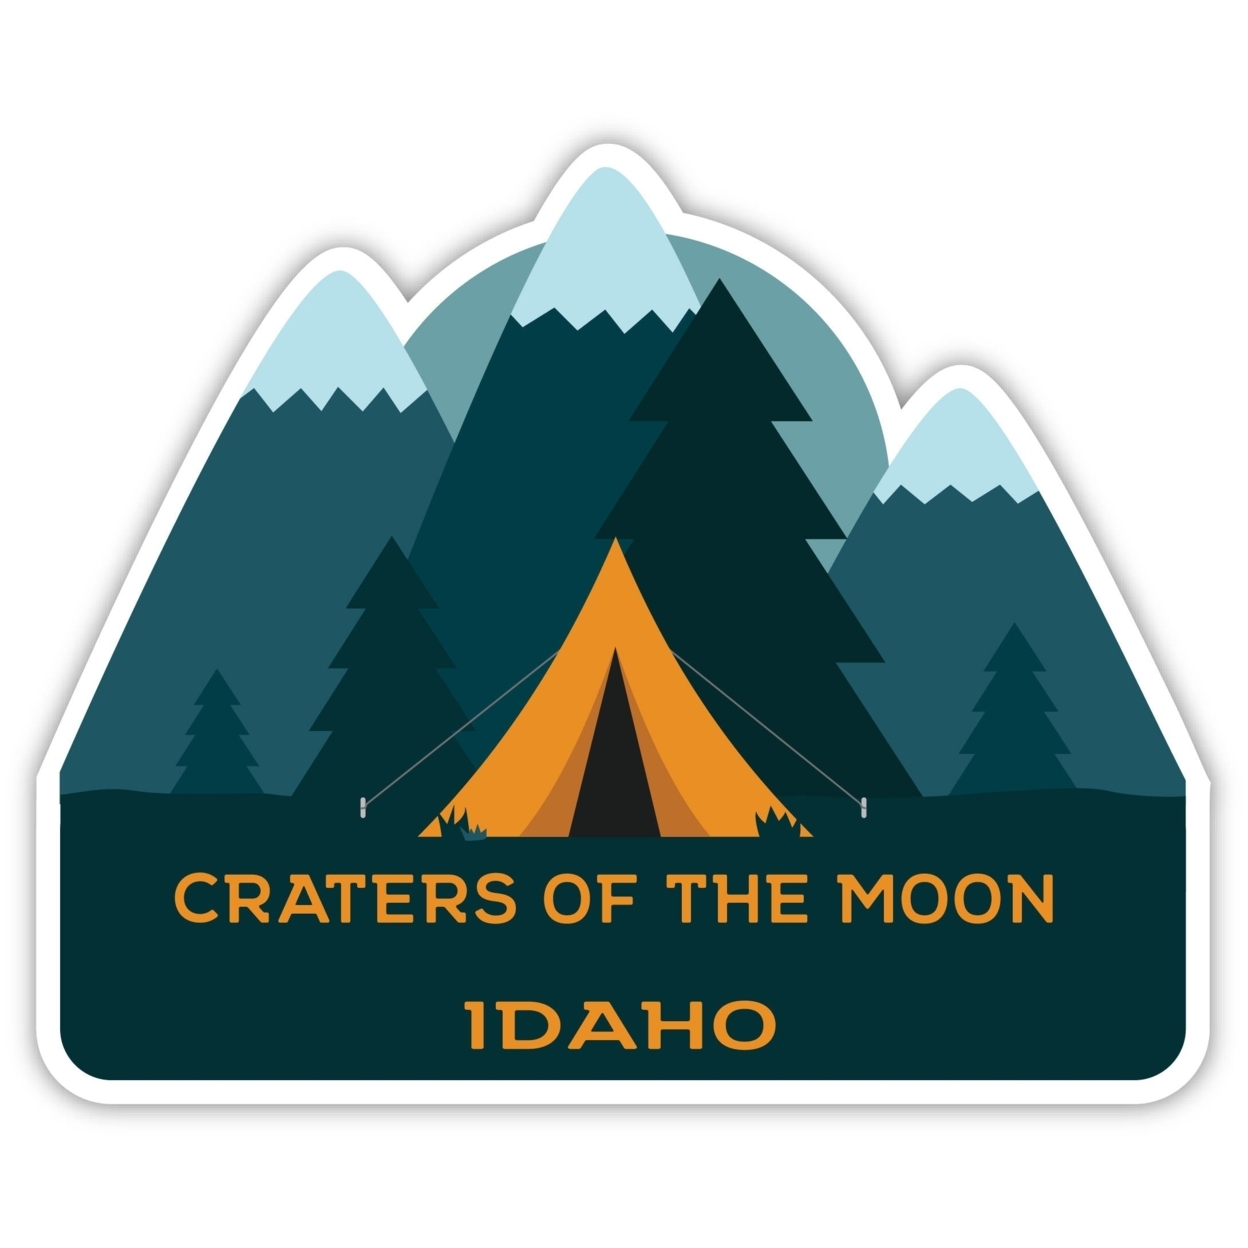 Craters Of The Moon Idaho Souvenir Decorative Stickers (Choose Theme And Size) - Single Unit, 10-Inch, Bear